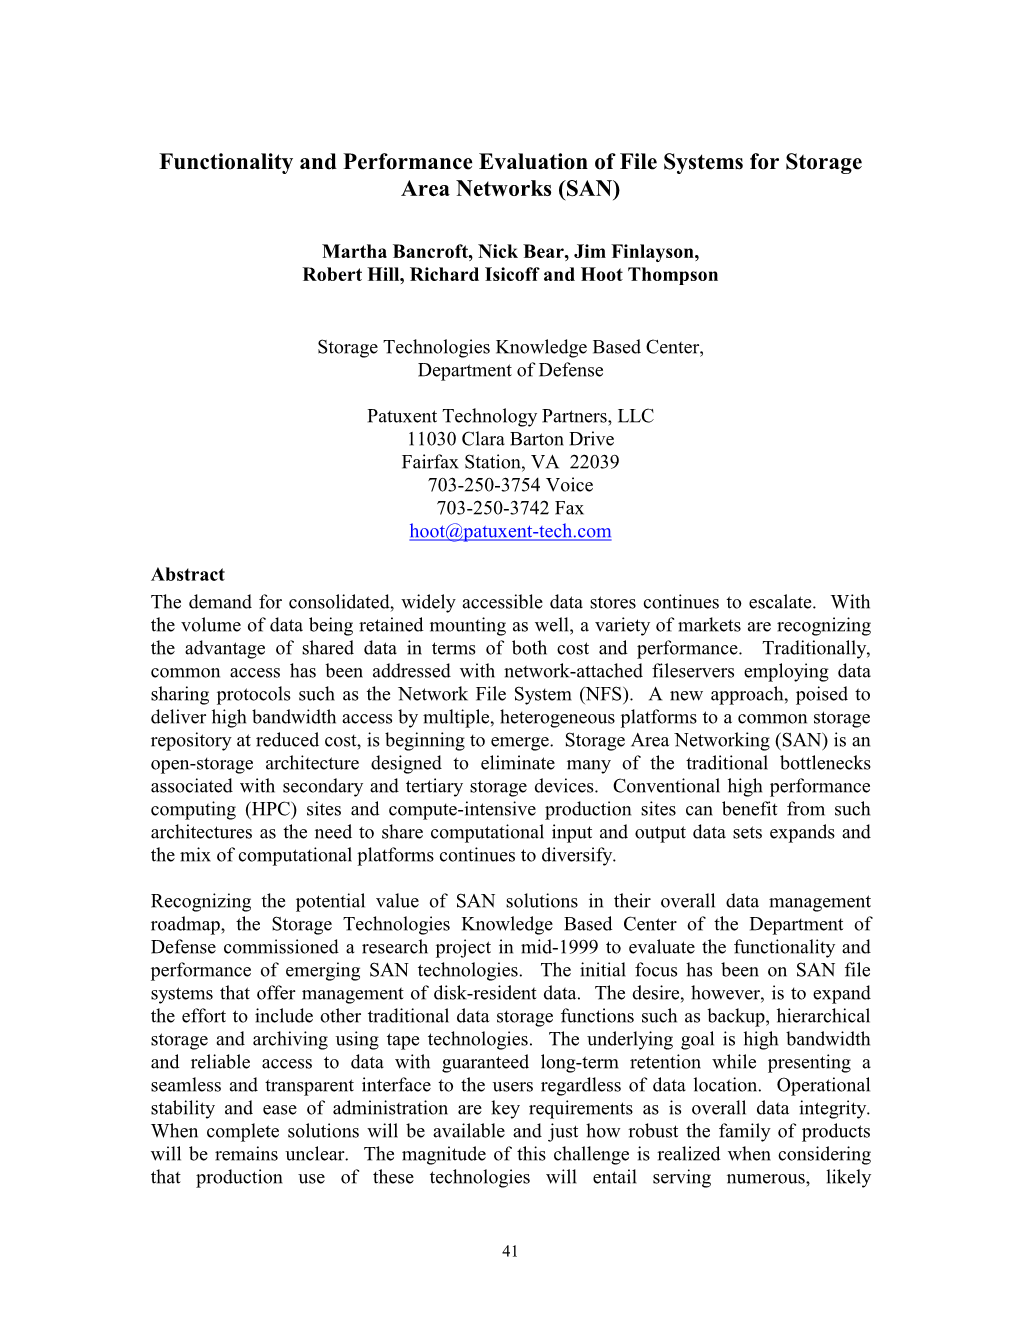 Functionality and Performance Evaluation of File Systems for Storage Area Networks (SAN)